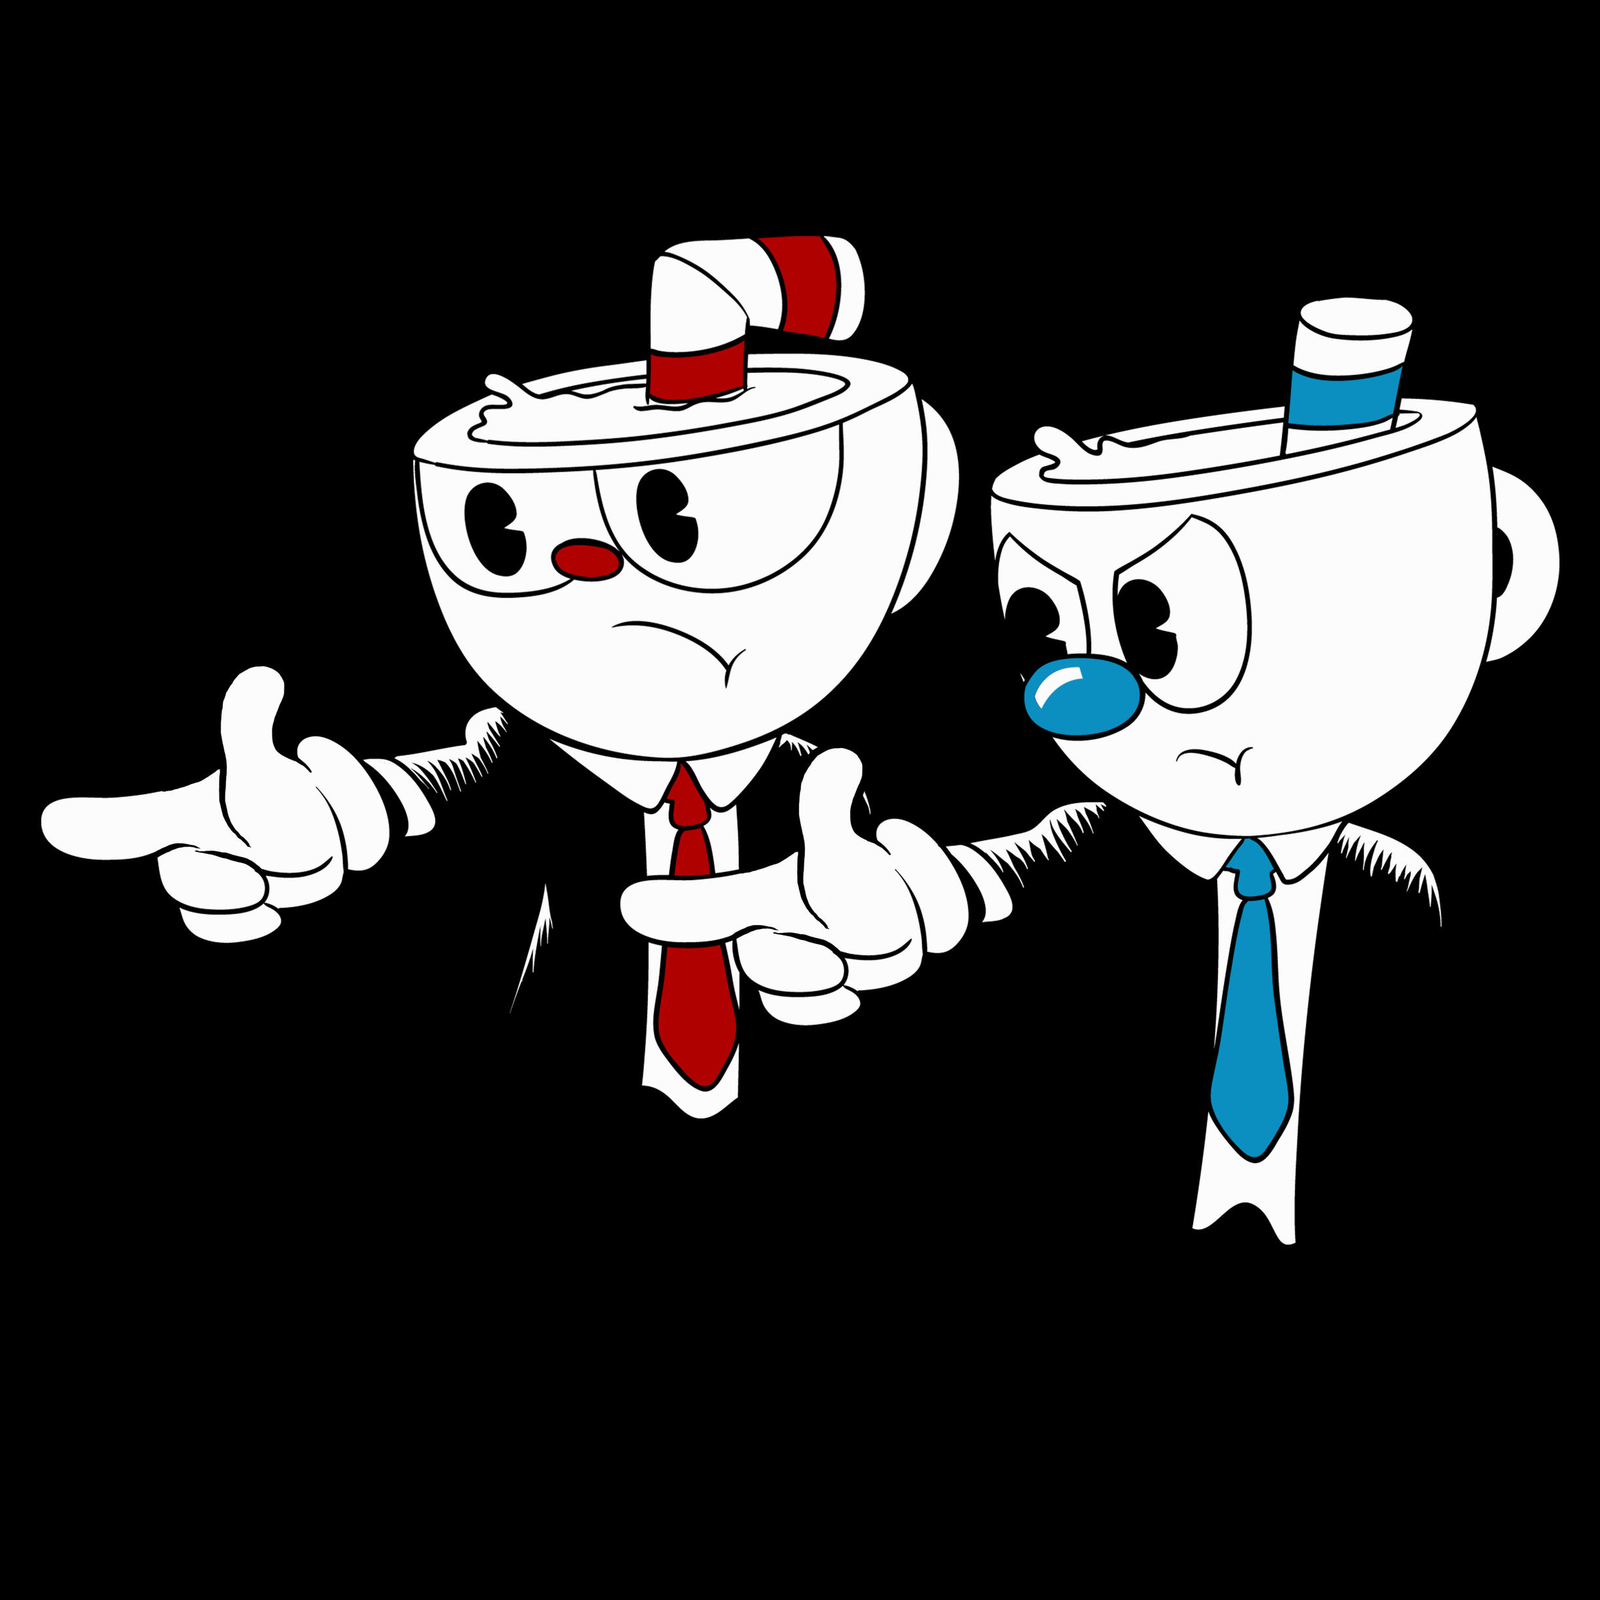 Cup Fiction - Games, Art, Crossover, Pulp Fiction, Cuphead, , 